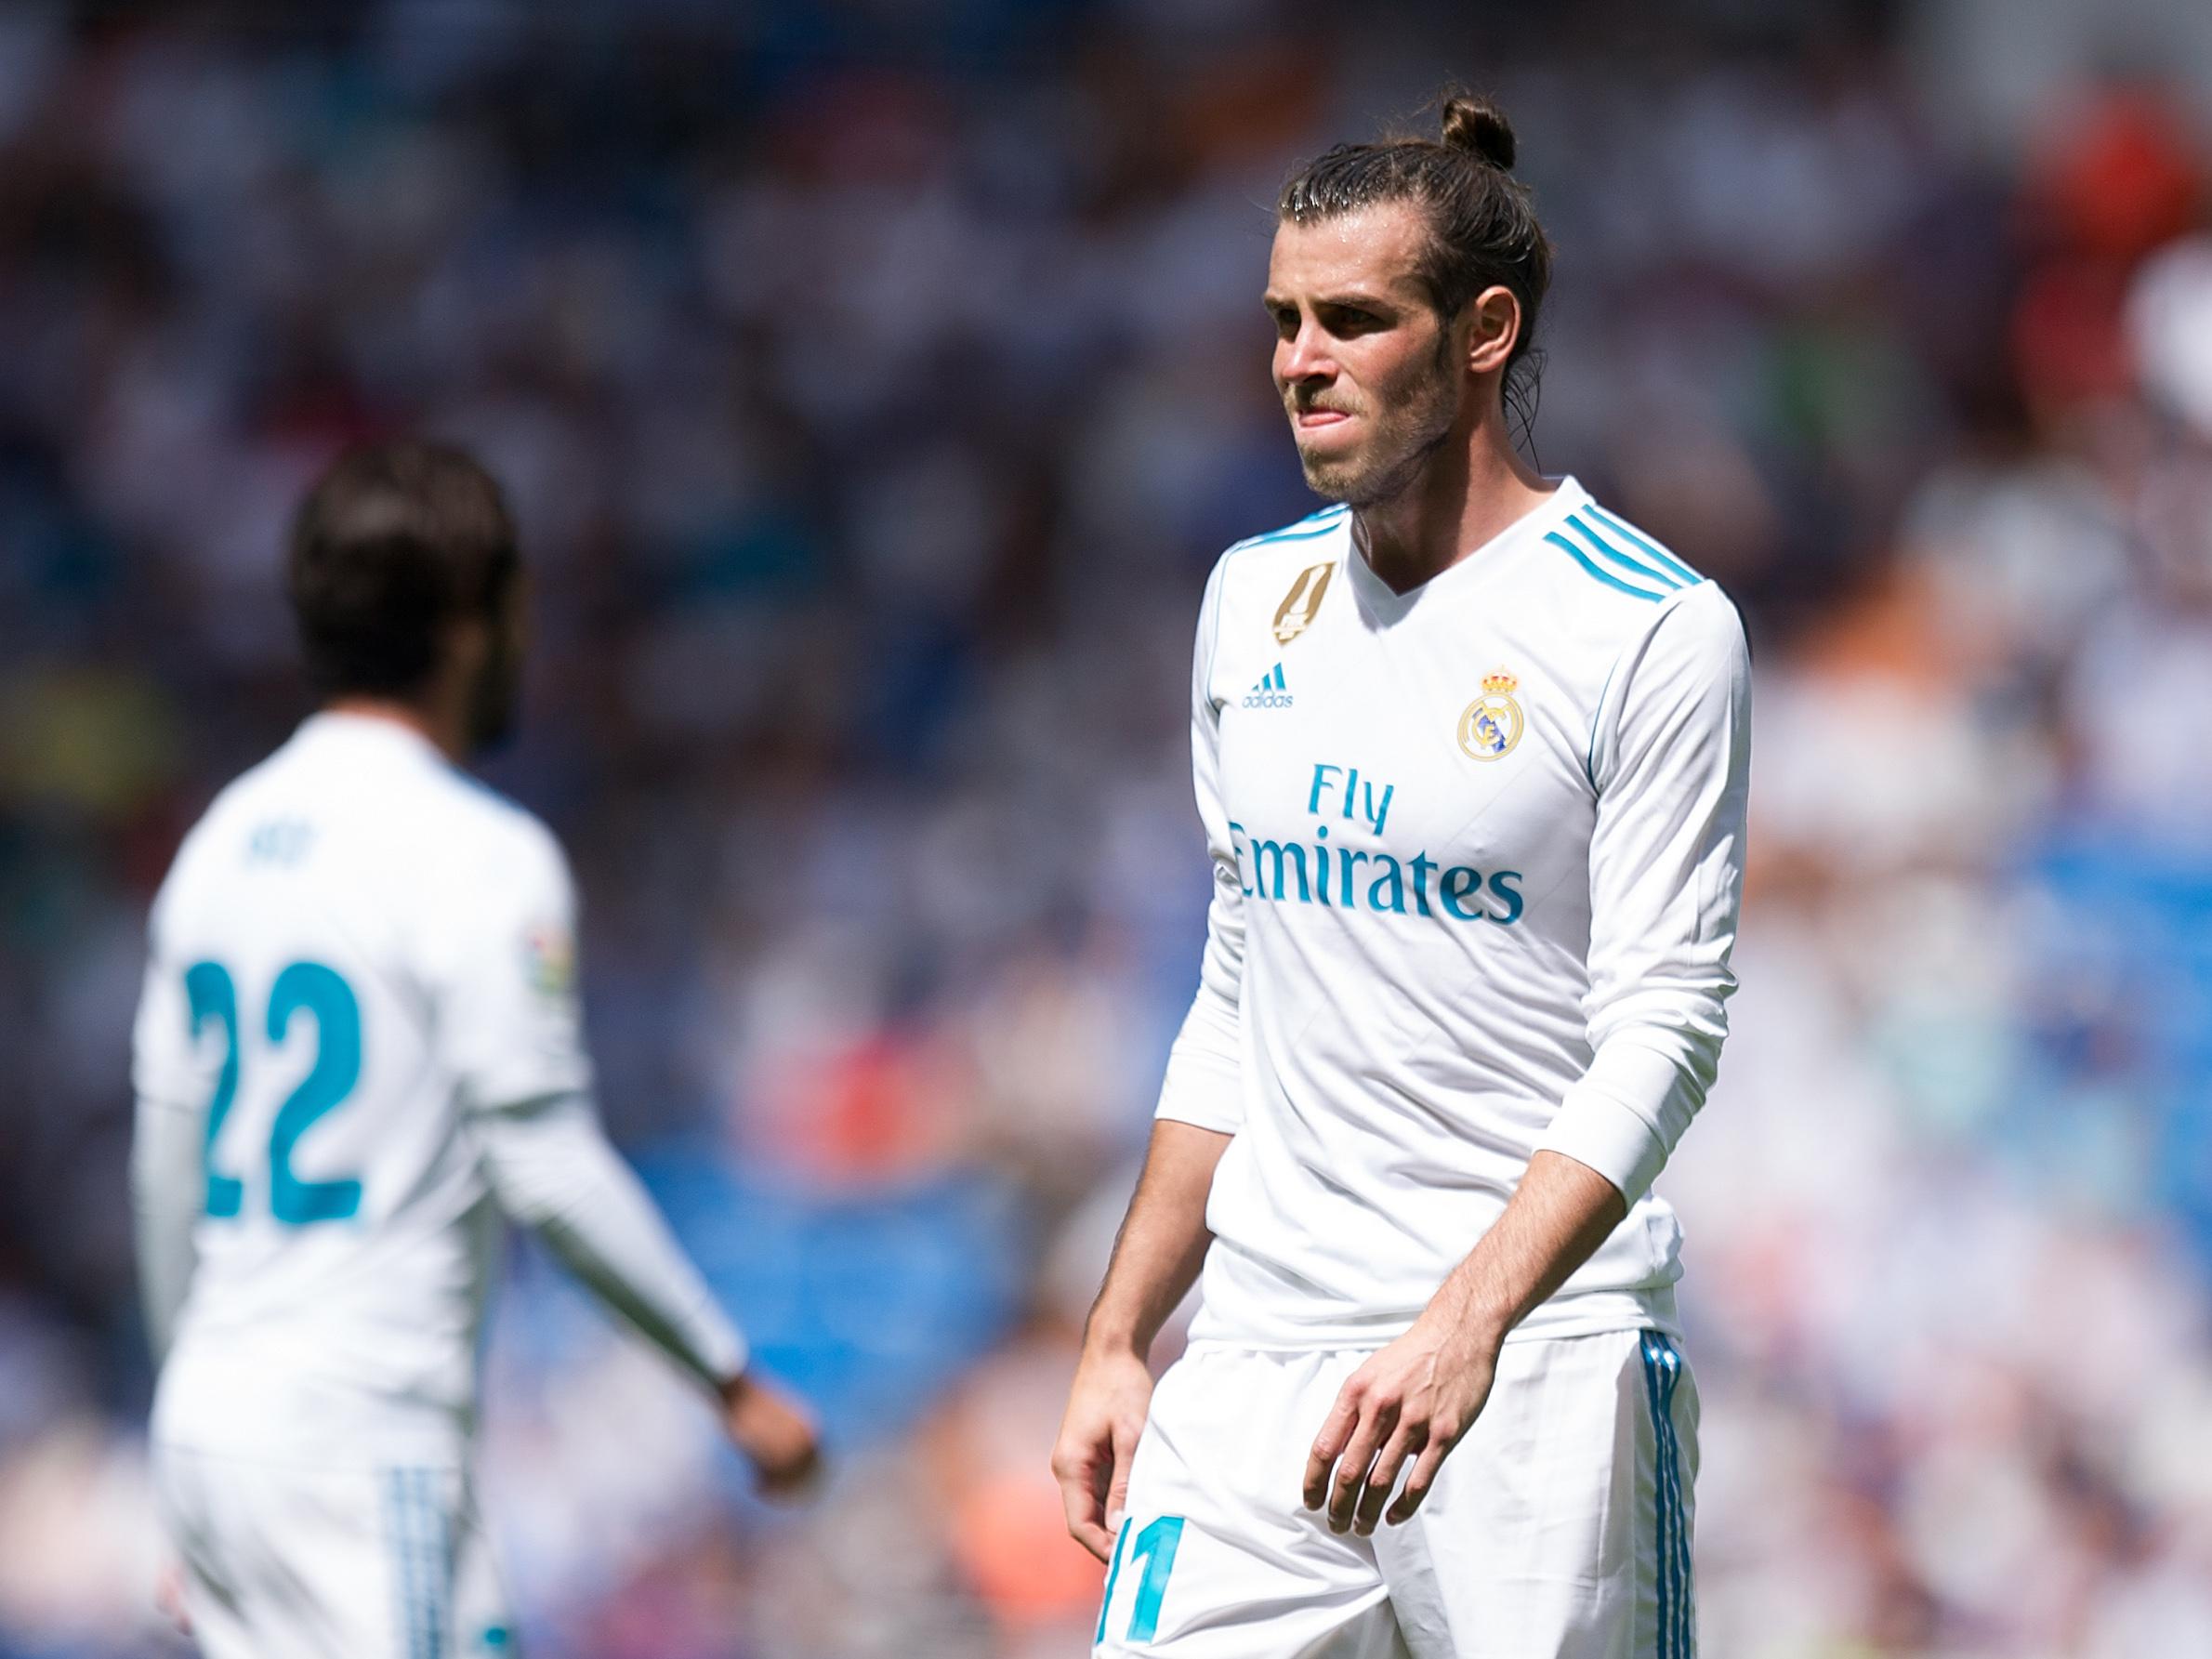 Bale's latest injury has seen him miss both games against former club Tottenham